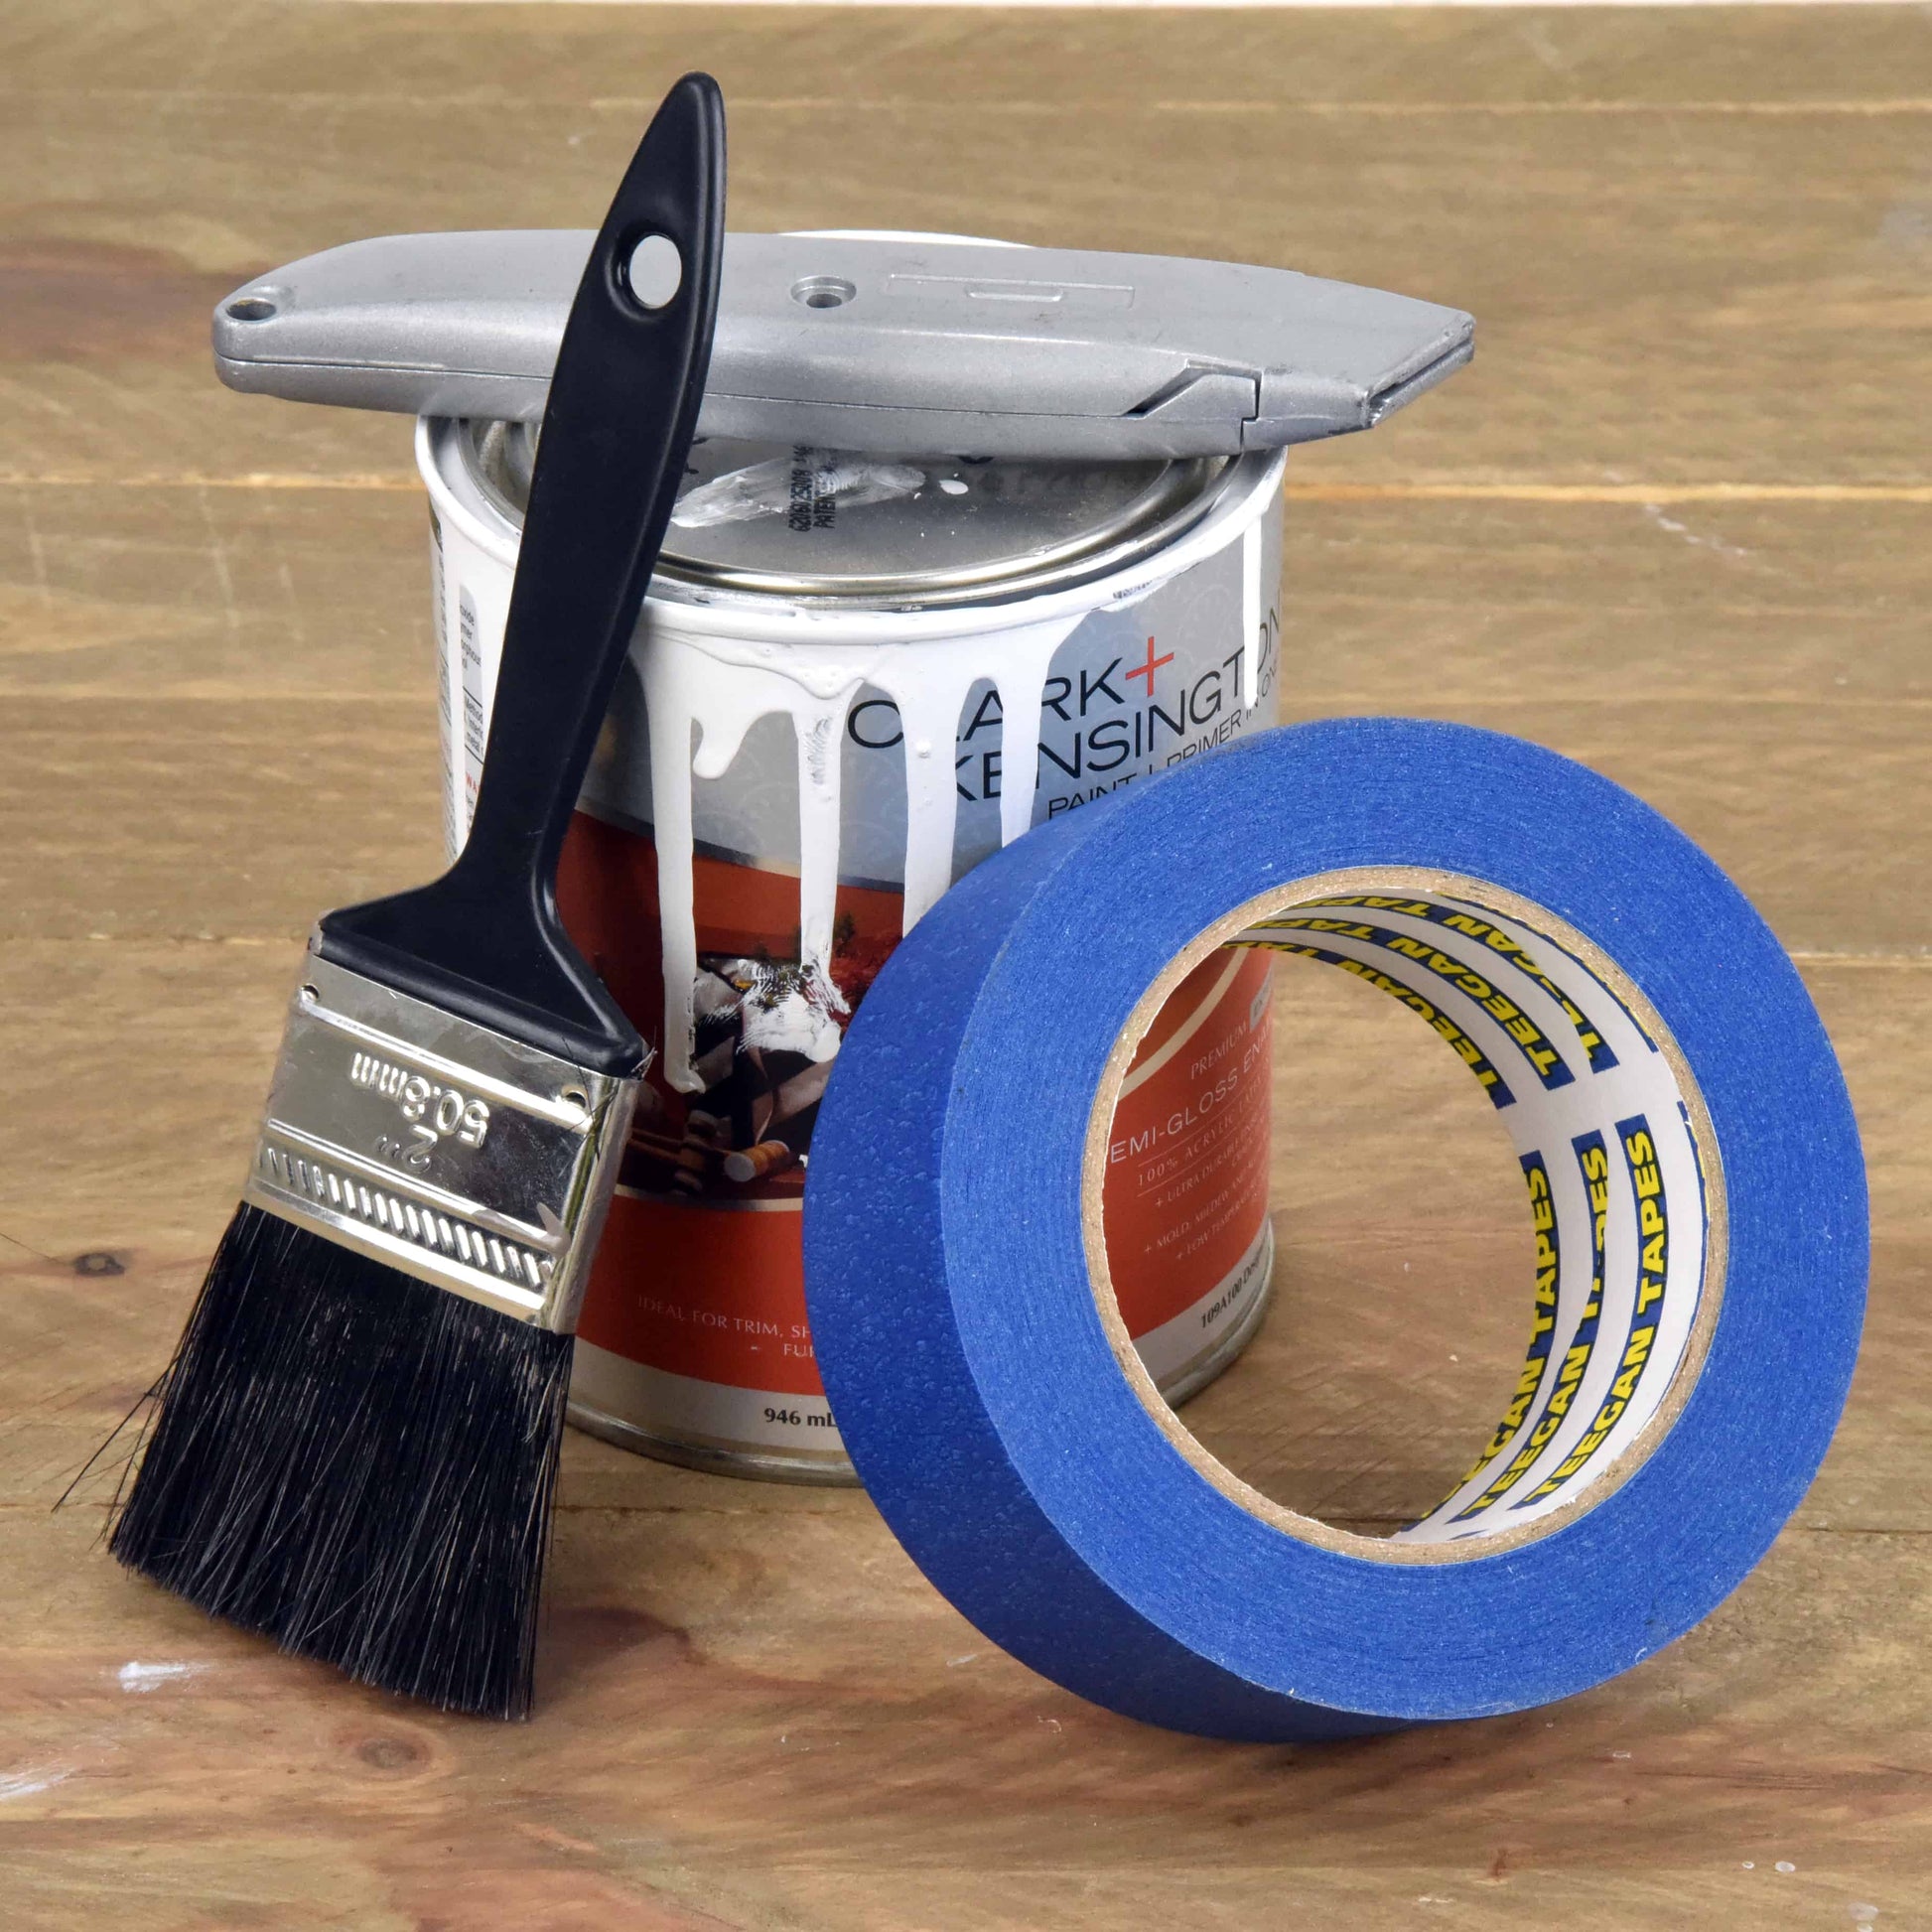  Painters Tape 2 Inch Wide By 50 Yards 2-PackTape For Walls  No Damage To PaintBlue Masking Tape Thin Paint Tape For WallsBlue Painters  Tape2-Pack By Teegan Tapes